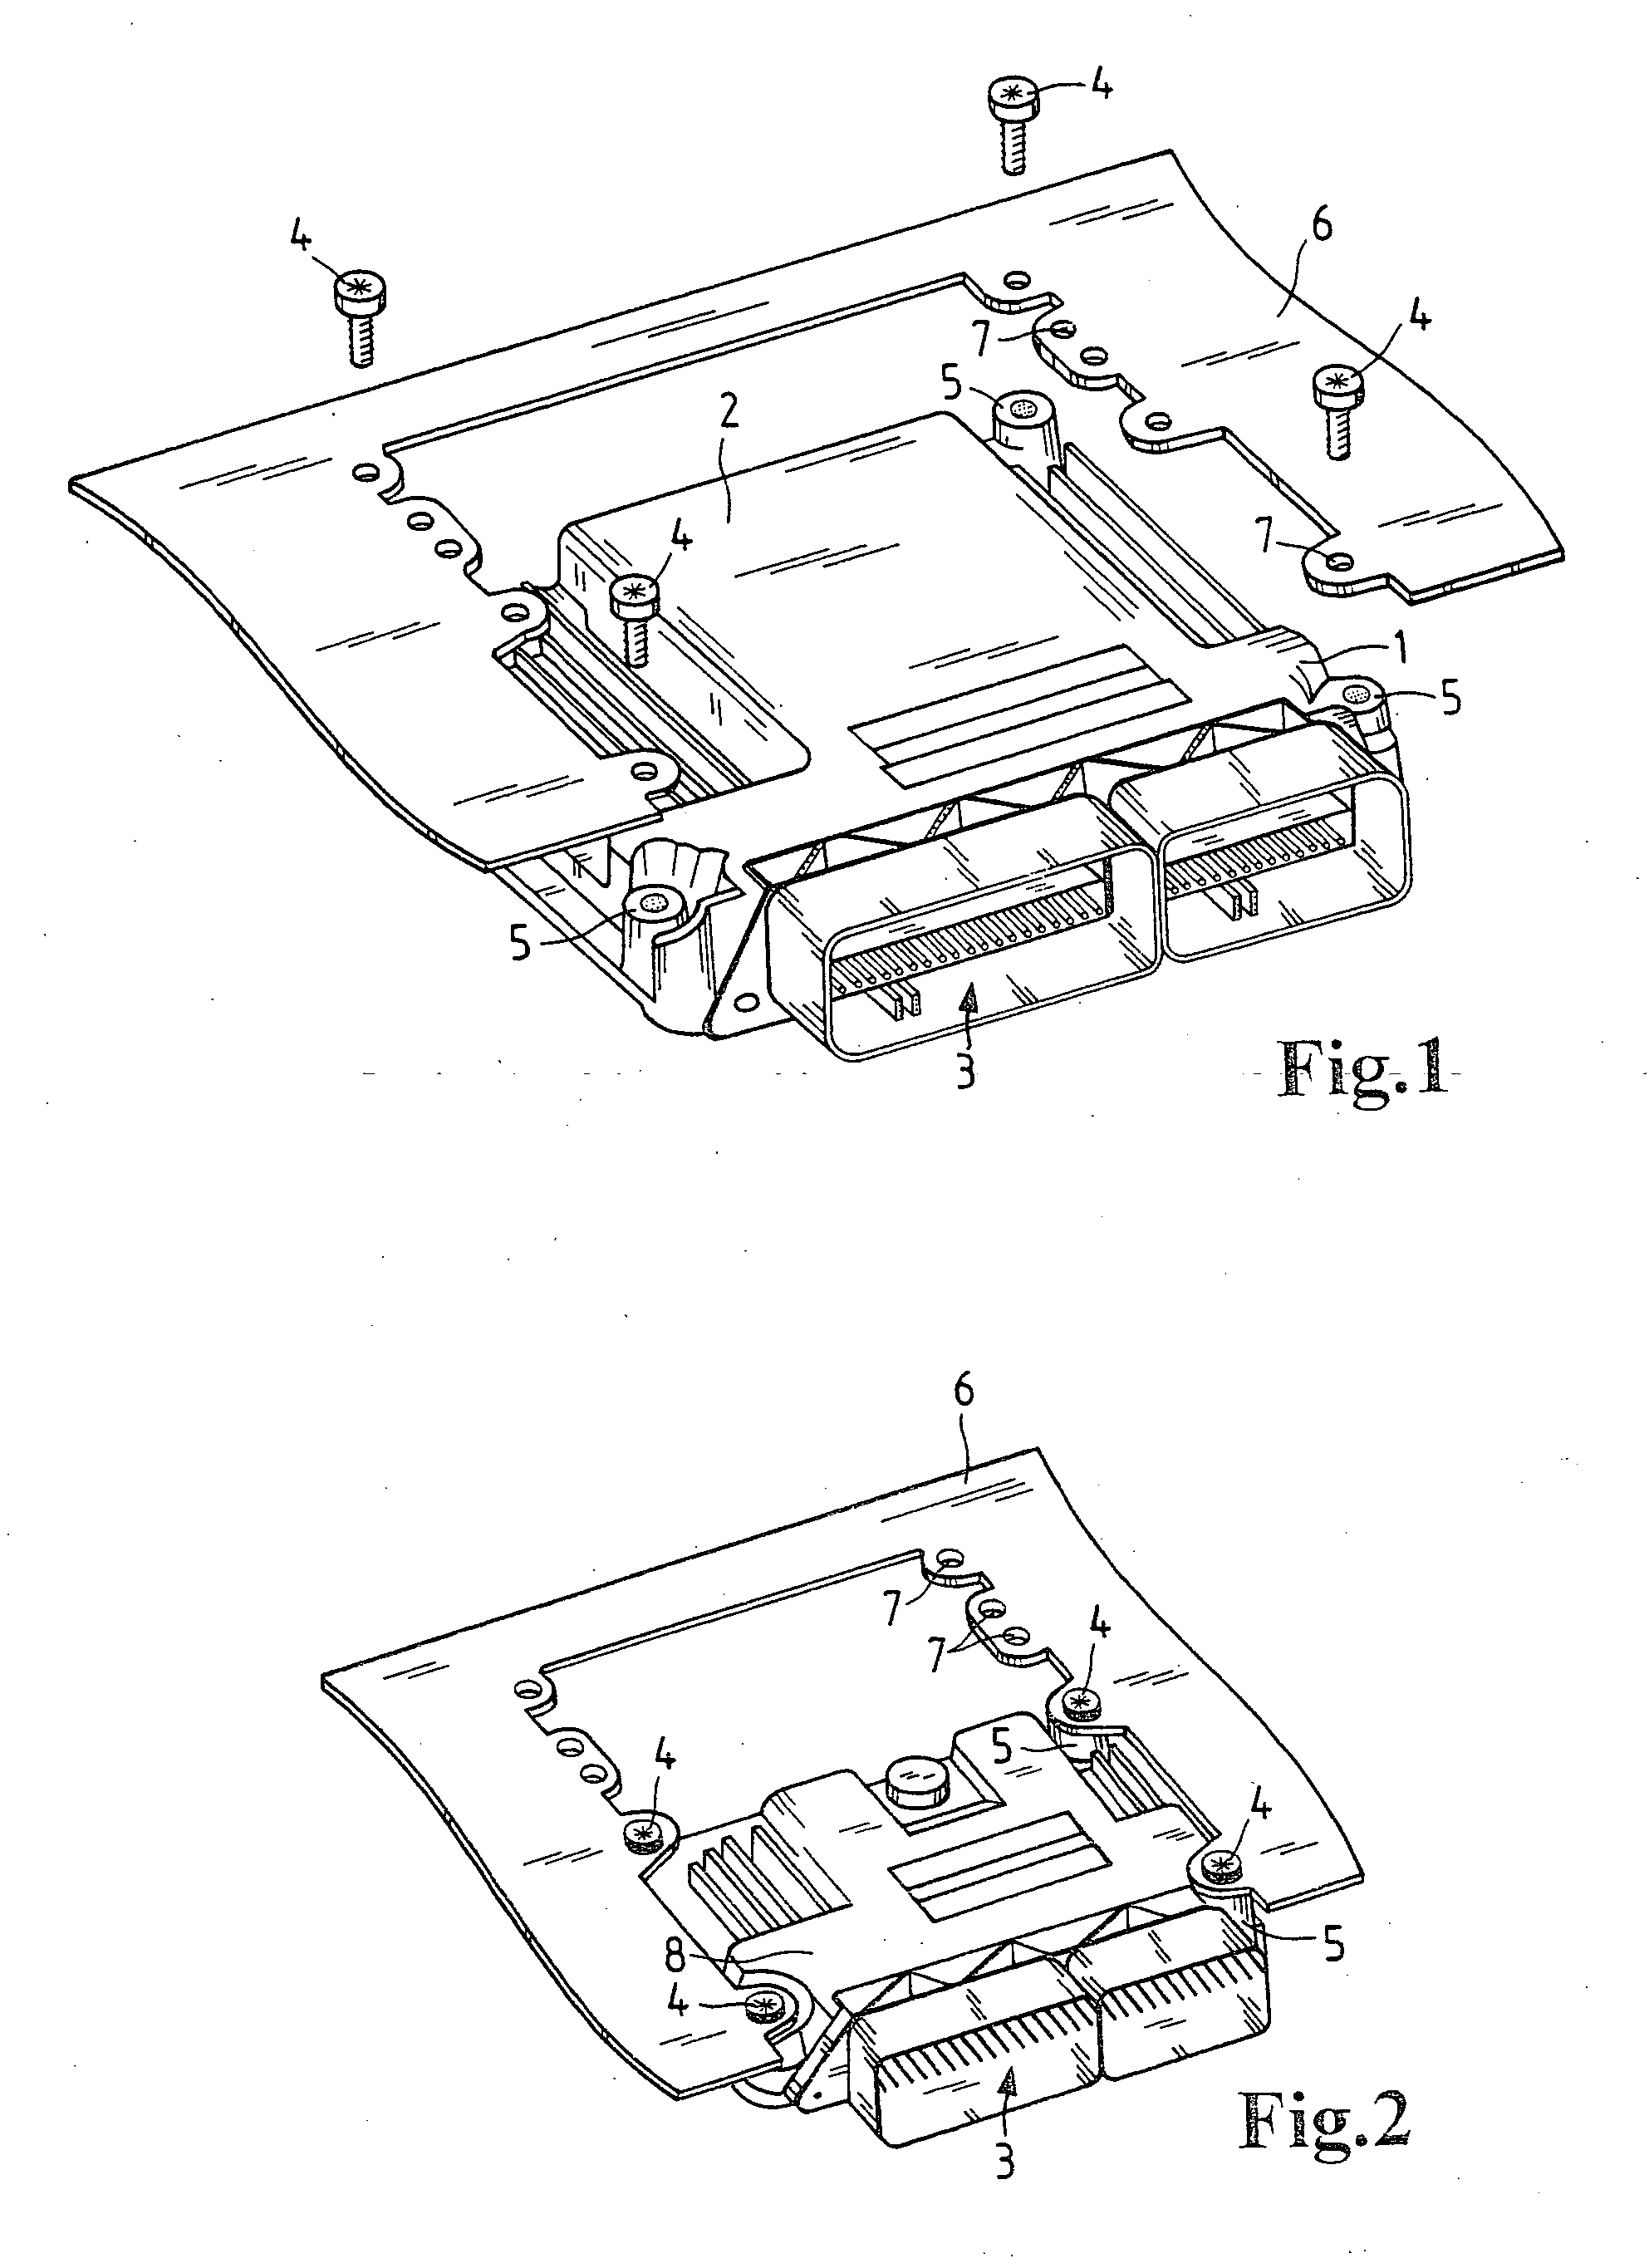 Fastening device for an electrical device